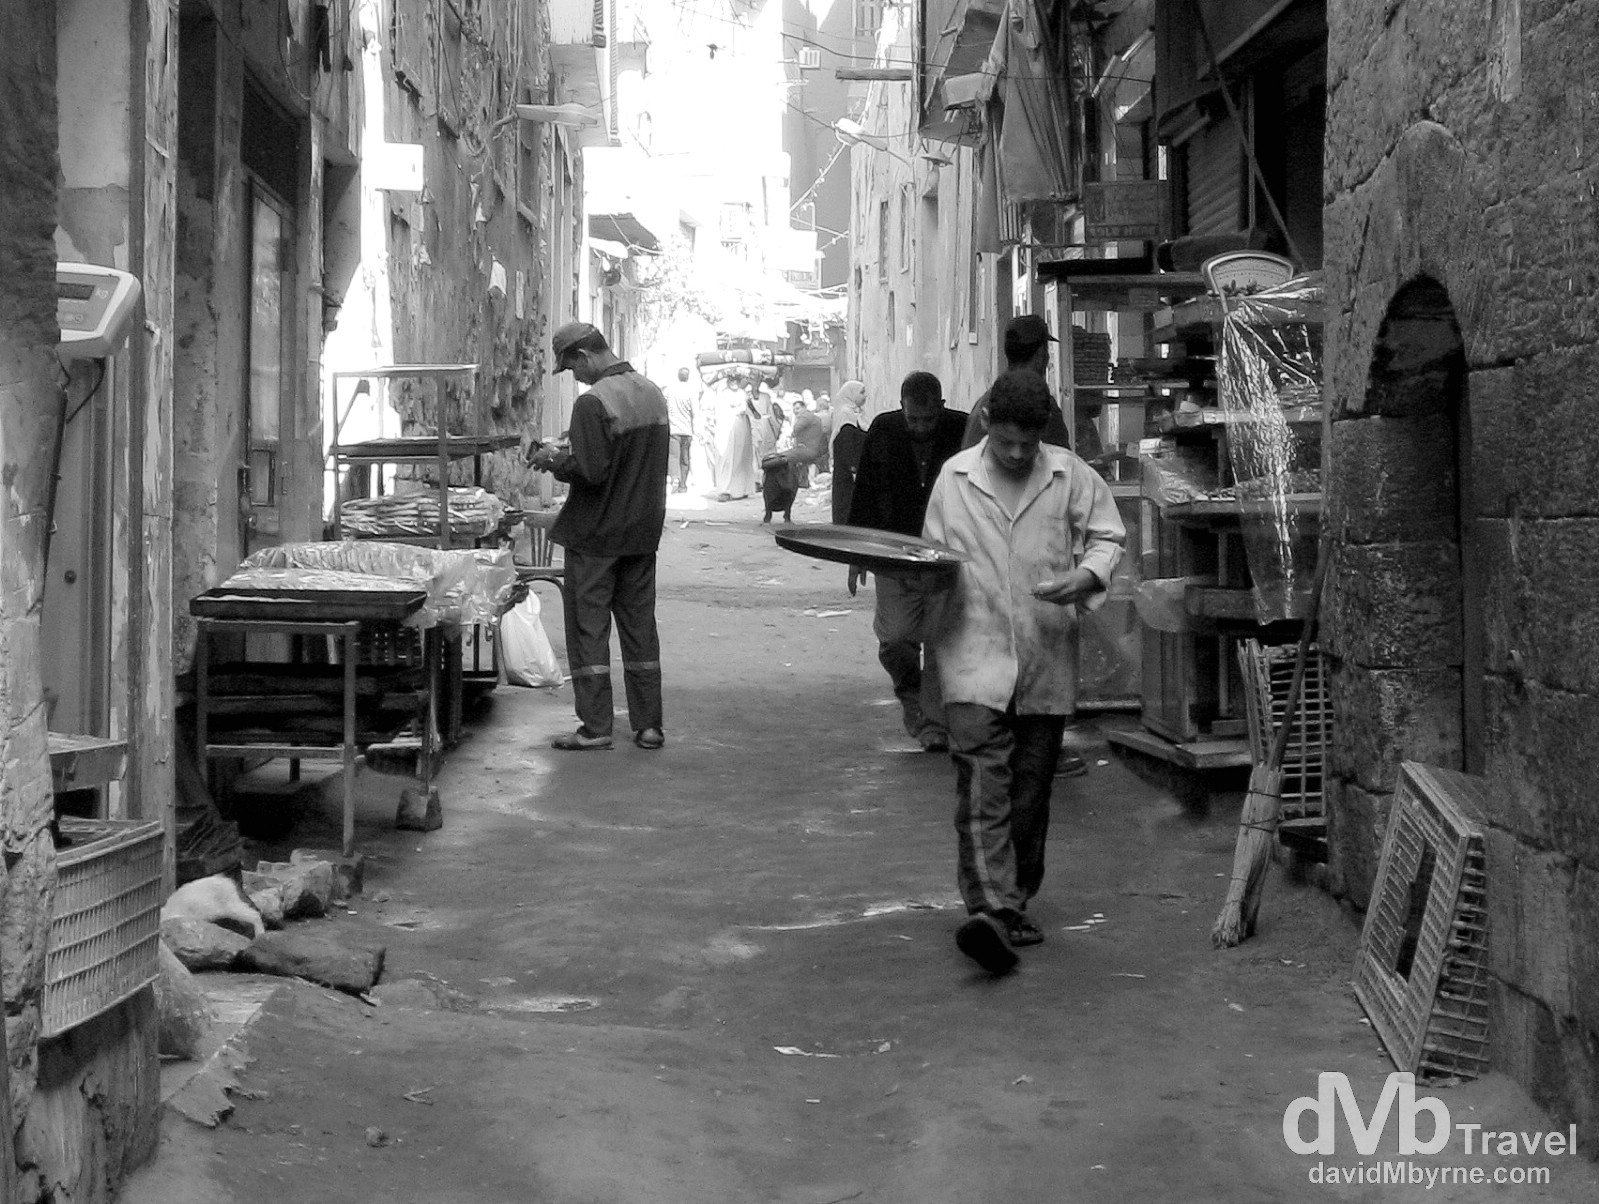 A busy lane in the Islamic Cairo area of Cairo, Egypt. April 14, 2008.